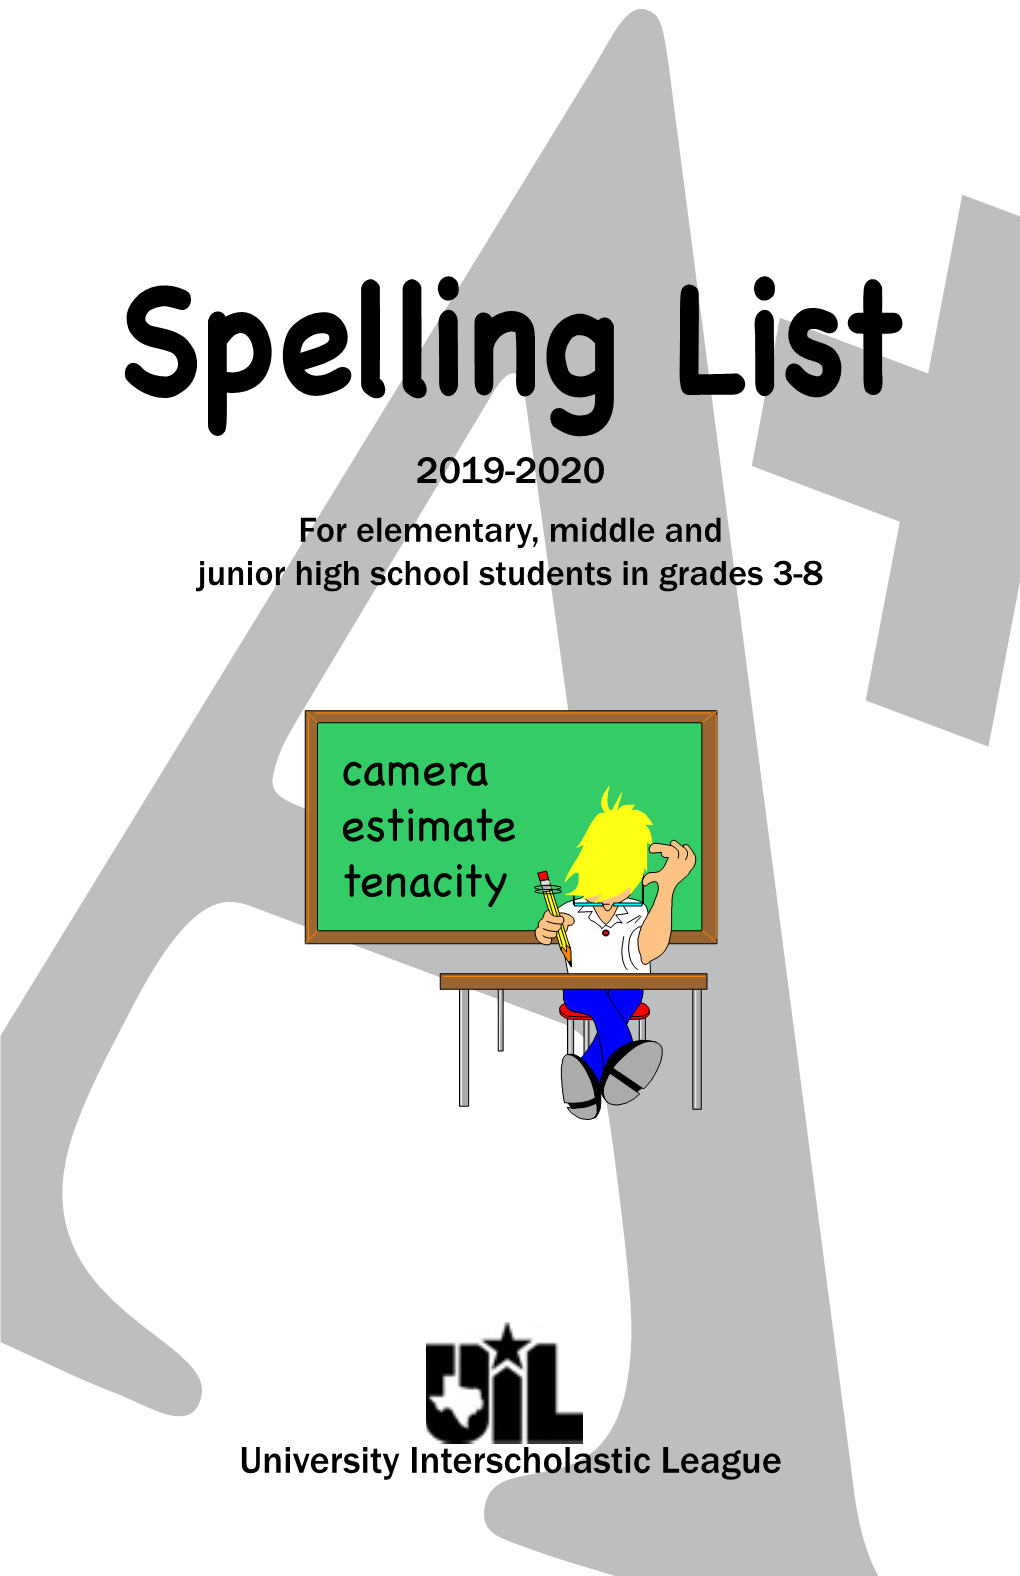 Spelling List 2019-2020 for Elementary, Middle and Junior High School Students in Grades 3-8